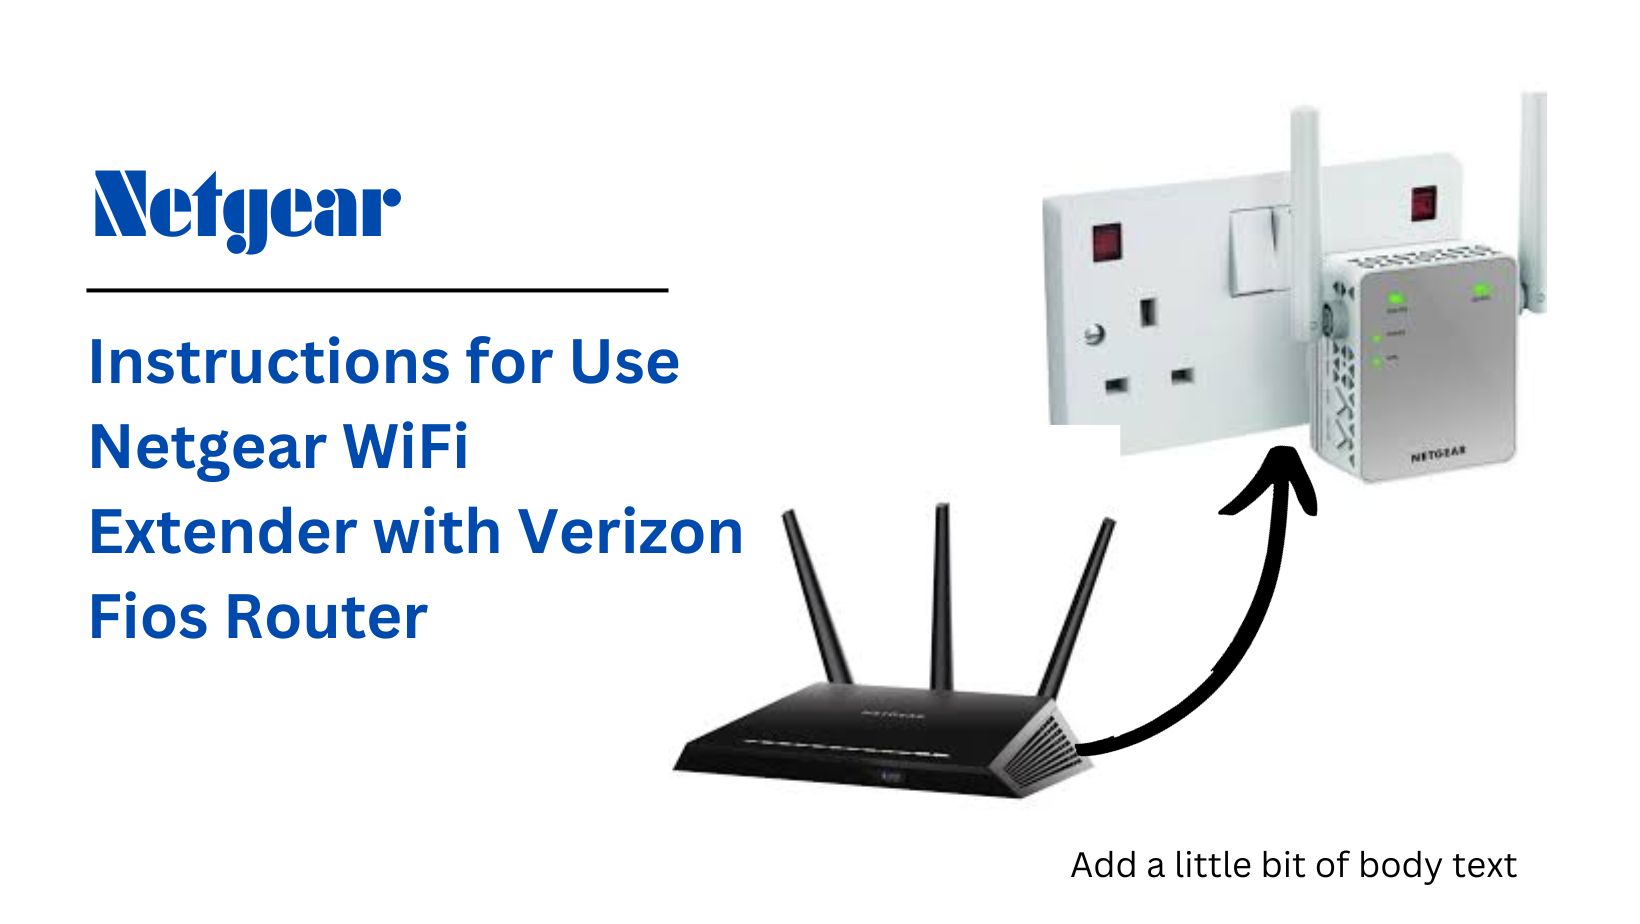 You are currently viewing Instructions for Use Netgear WiFi Extender with Verizon Fios Router